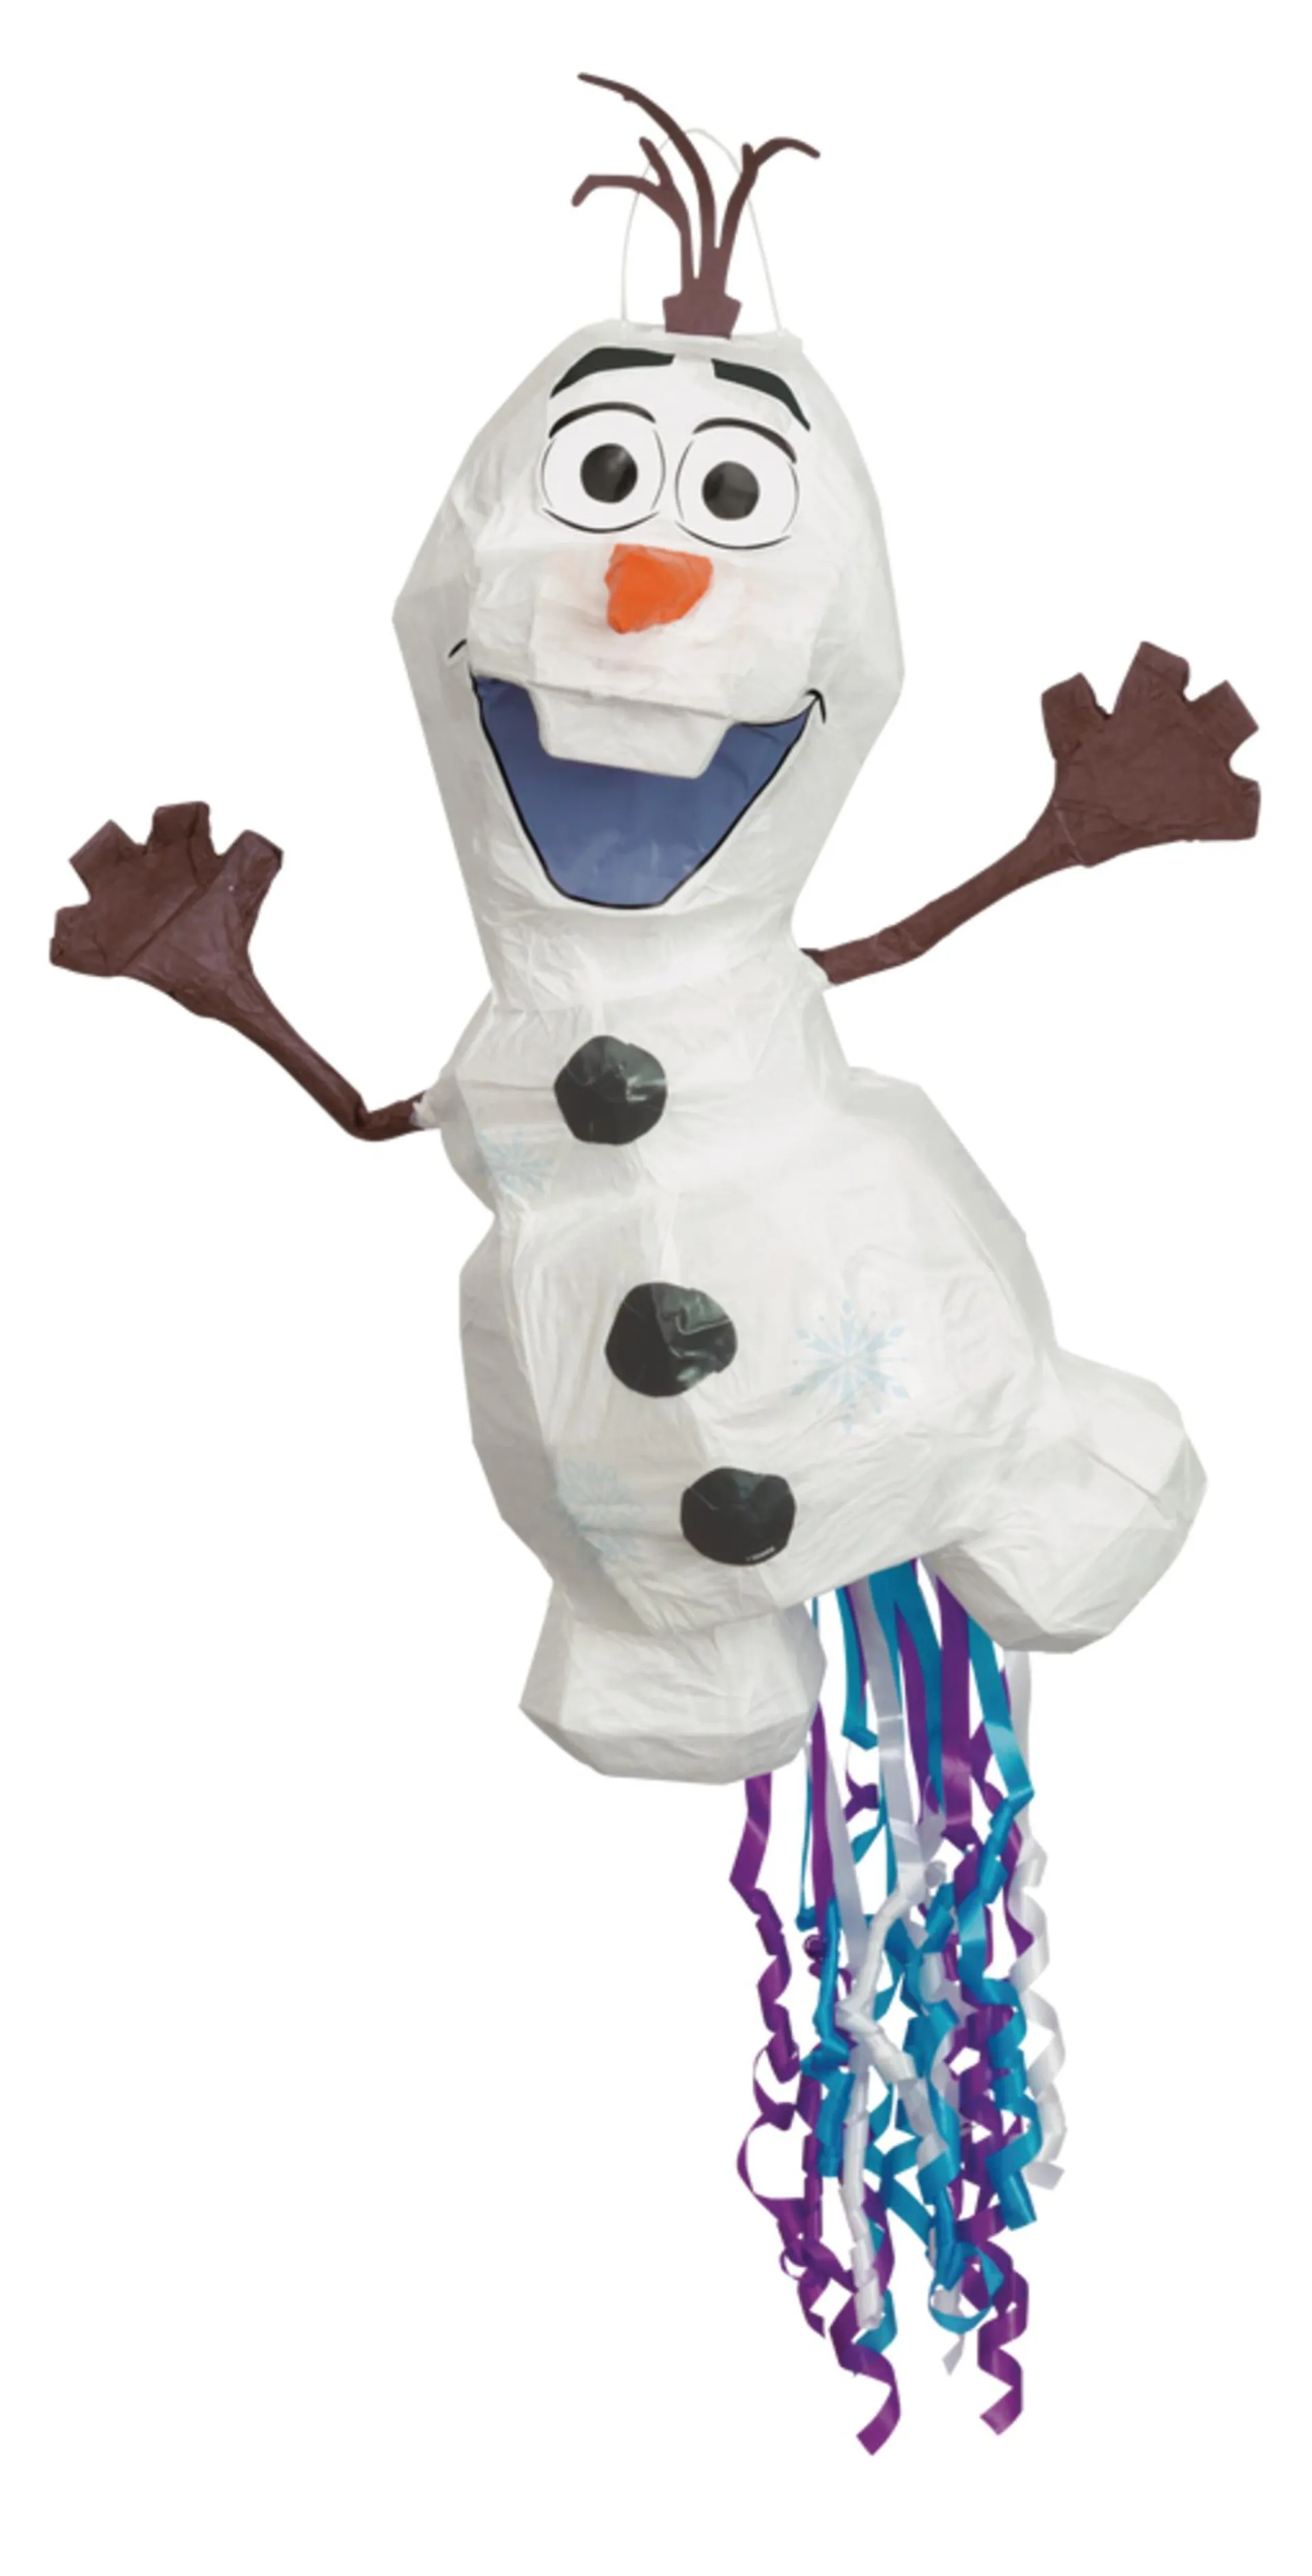 Disney Frozen Olaf Pinata Hanging Pull String Decoration, White, 13-in, Holds 2lb of Pinata Filler, for Birthday Parties